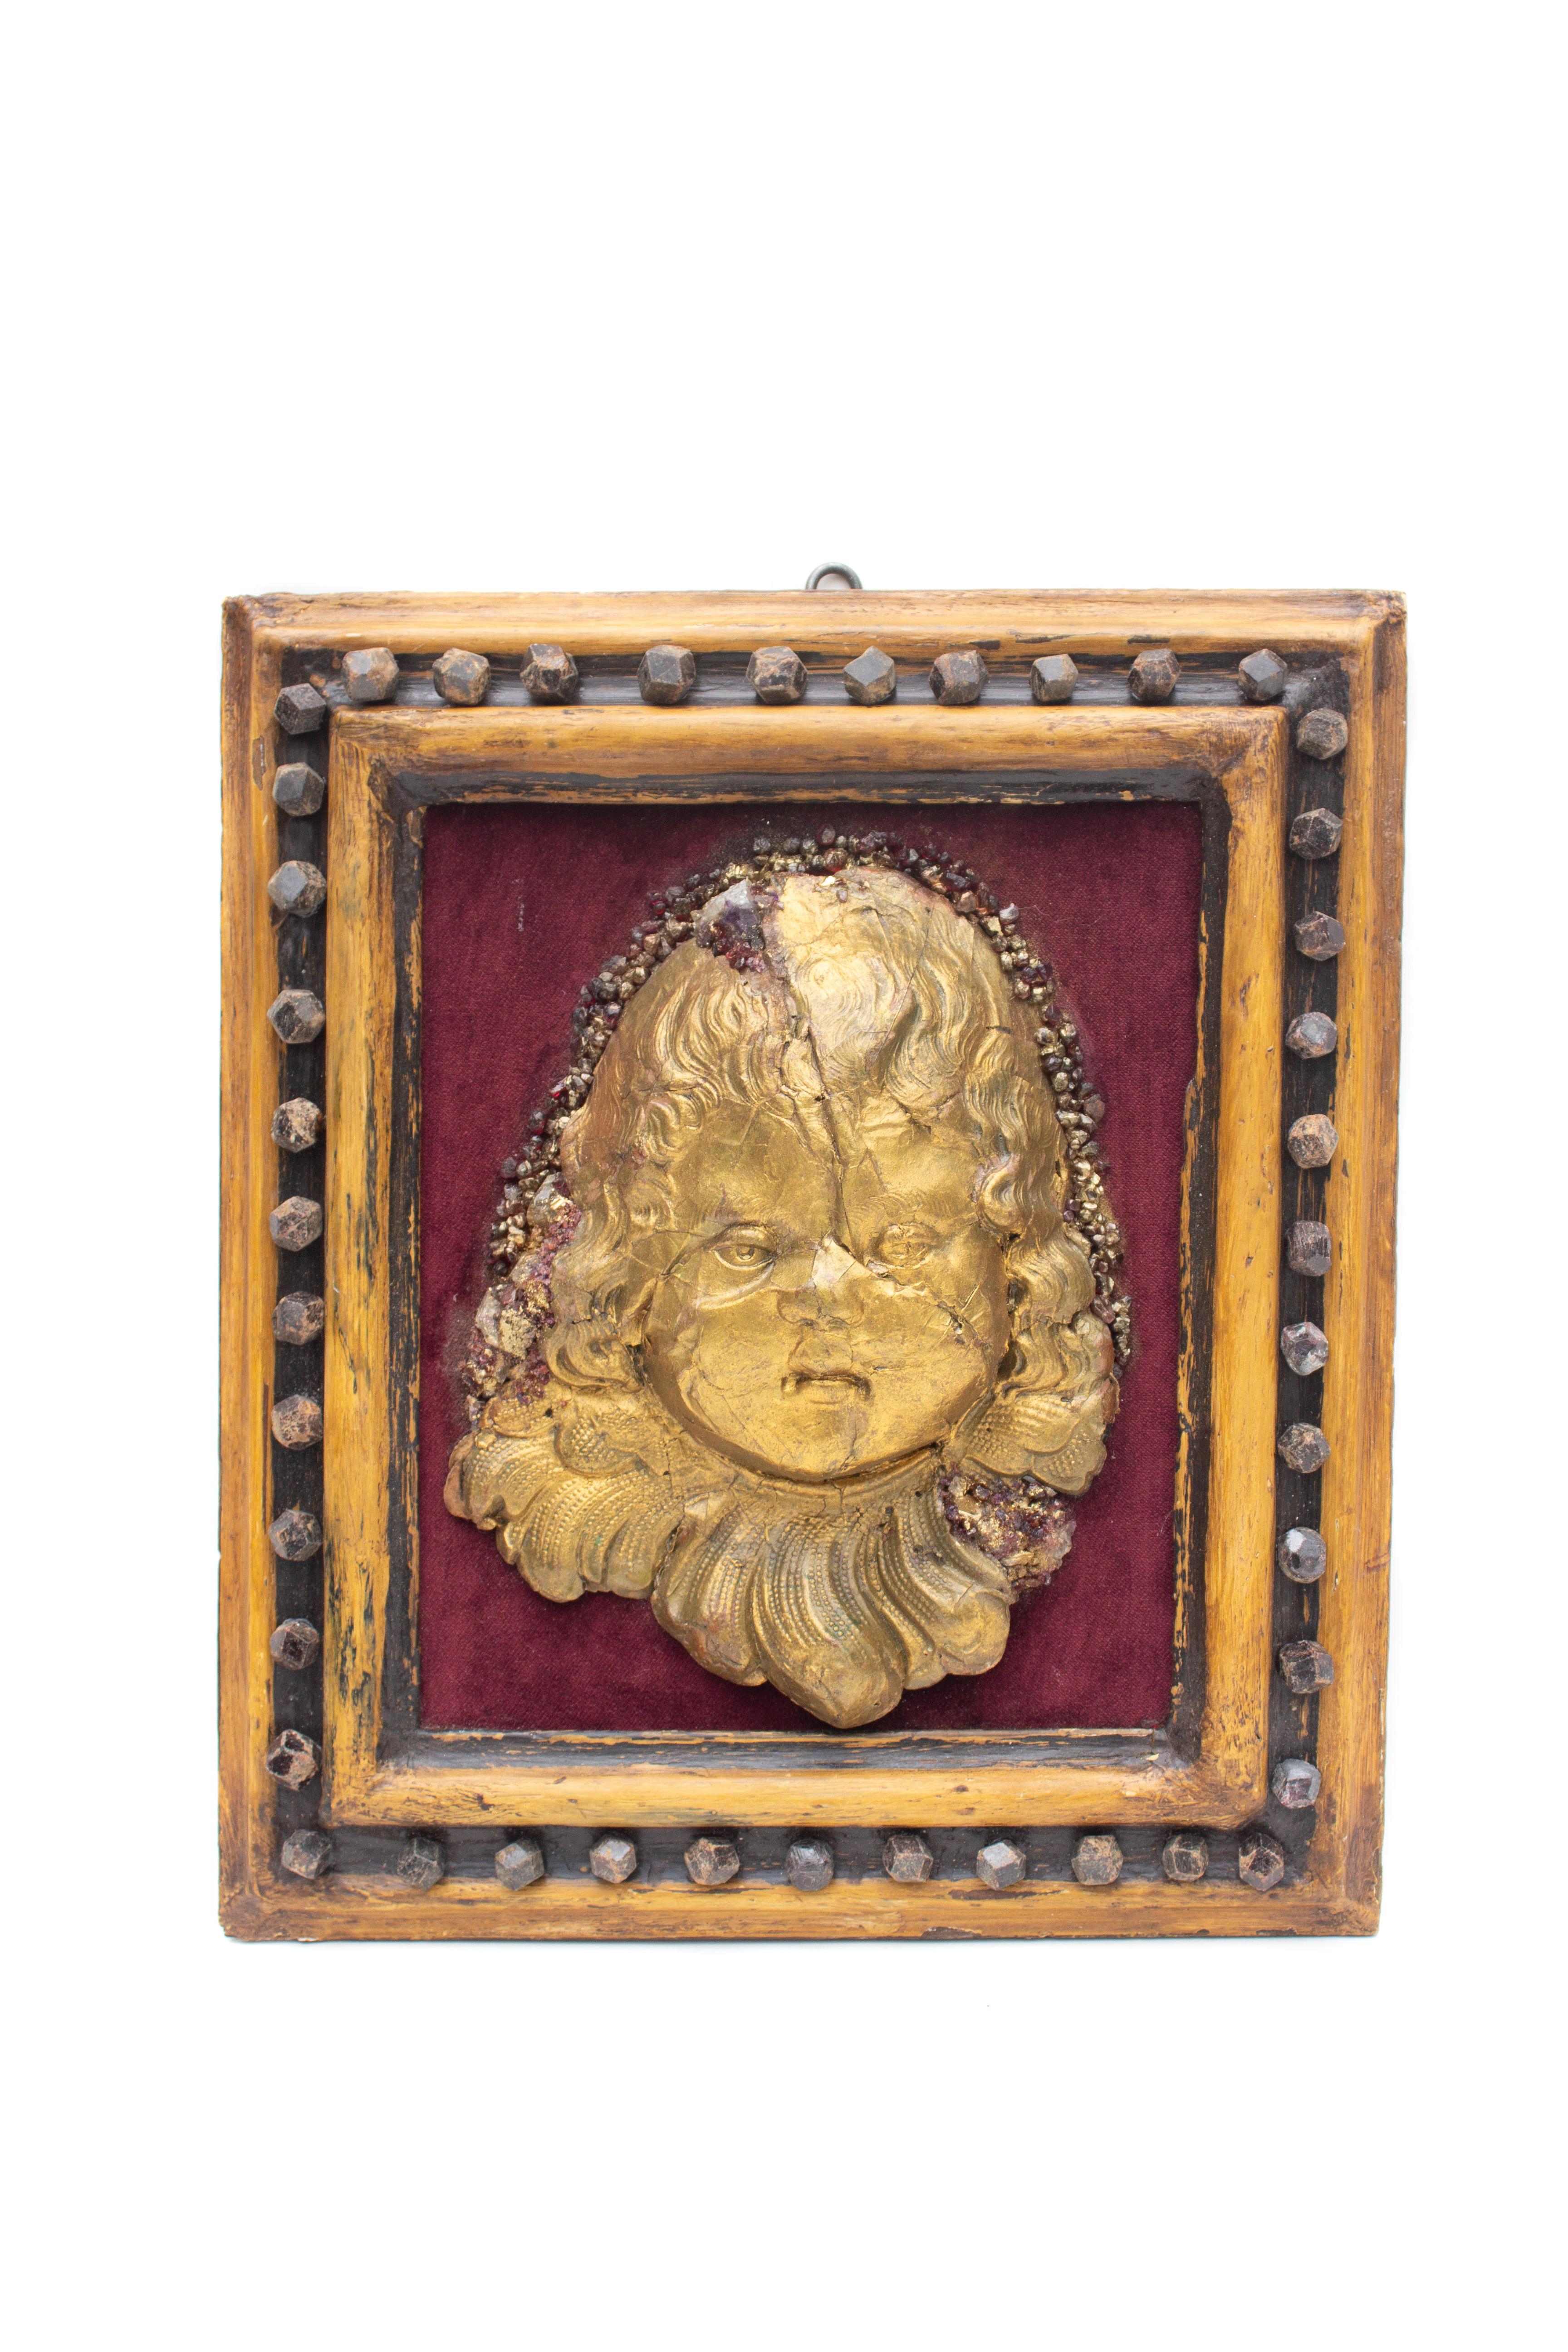 Framed 18th century Italian gold leaf angel head 'putto' wall relief sculpture with burgundy velvet and adorned with rubies and garnets. There is a halo of rubies and garnets around the head and the angel 'putto' was sculpted from papier-mâché. It